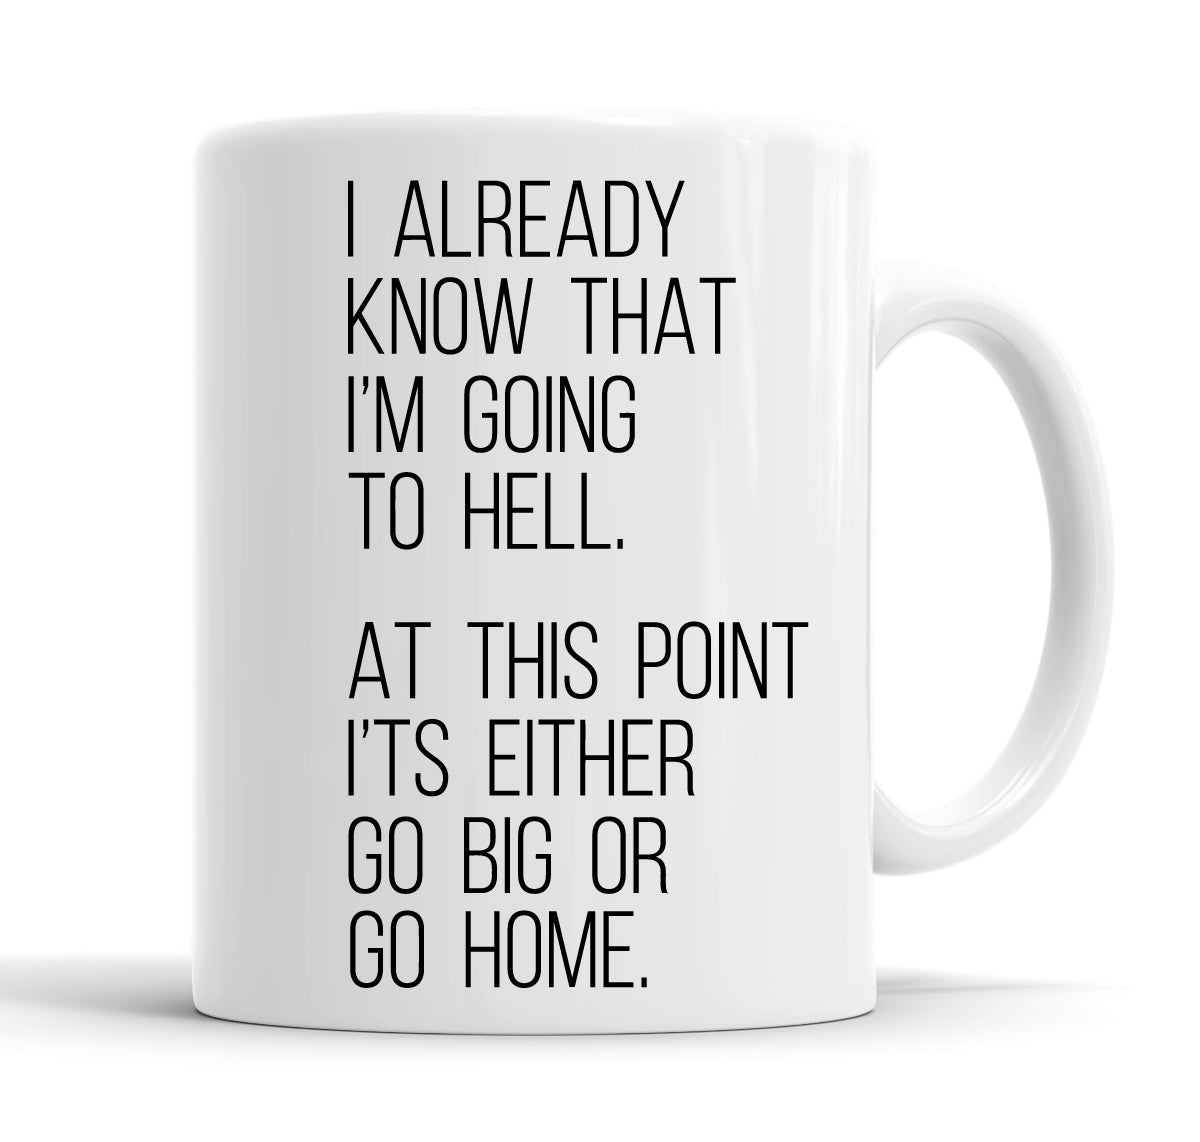 I Already Know That I'm Going To Hell, At This Point It's Either Go Big Or Go Home Funny  Office Coffee Mug Tea Cup